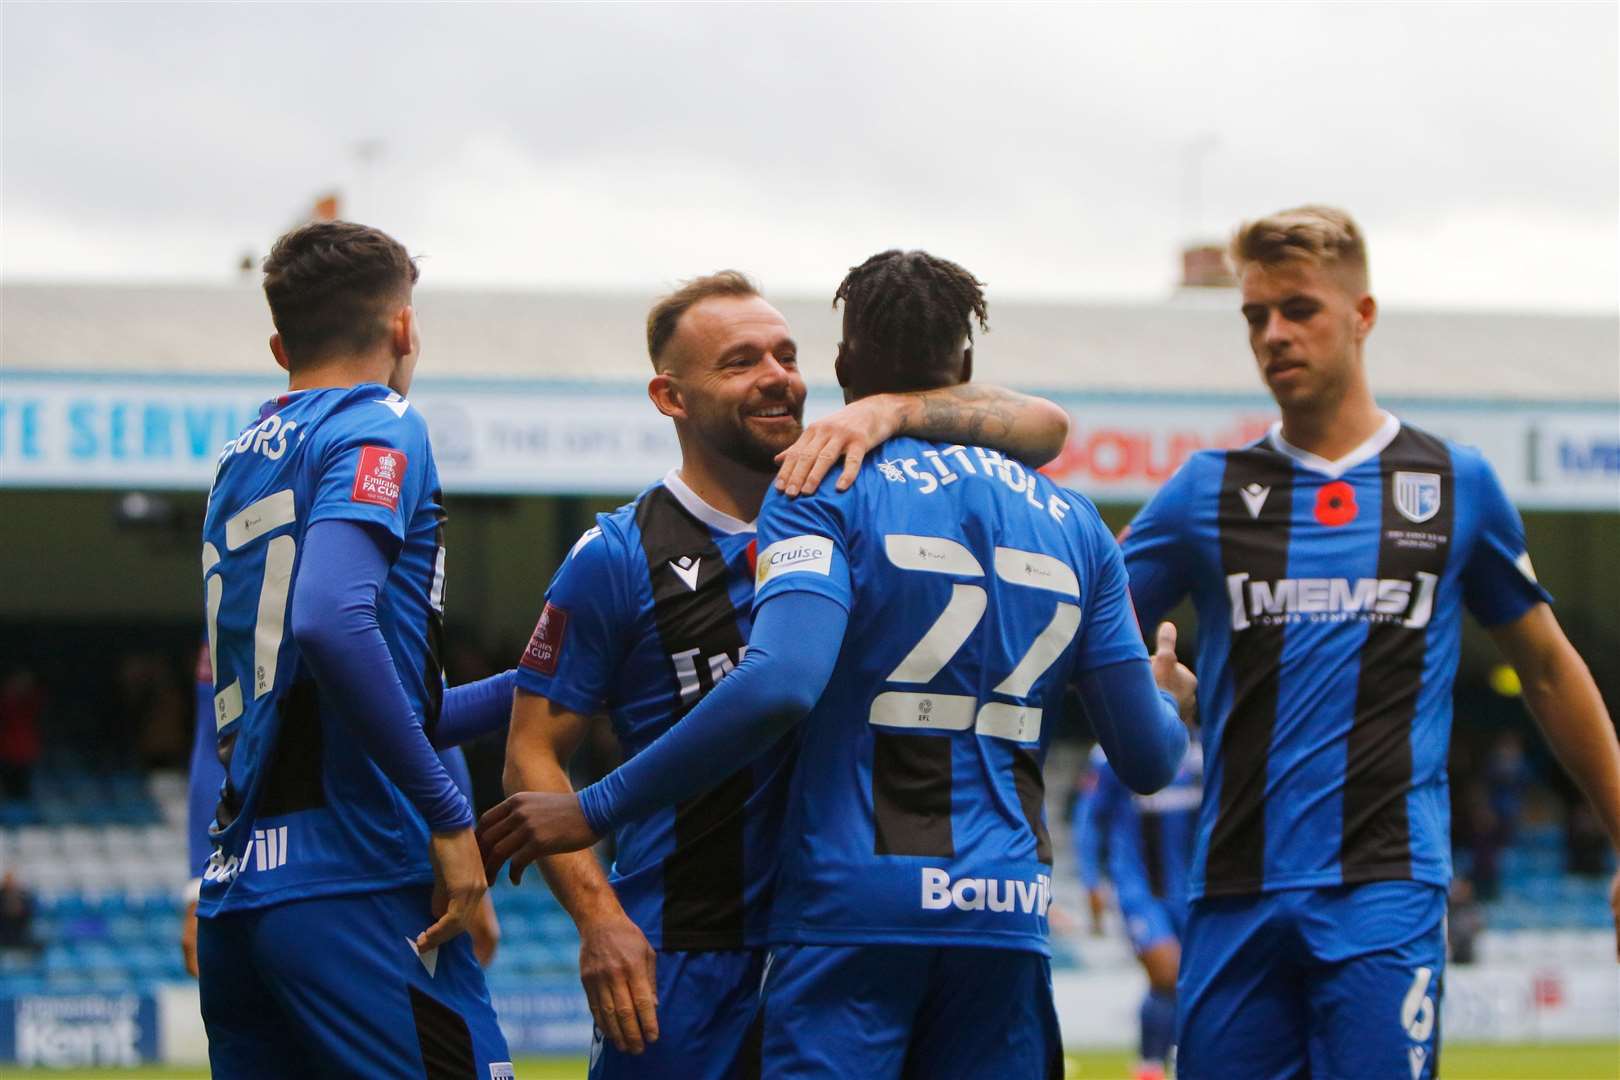 Gillingham's next campaign will start at the end of July